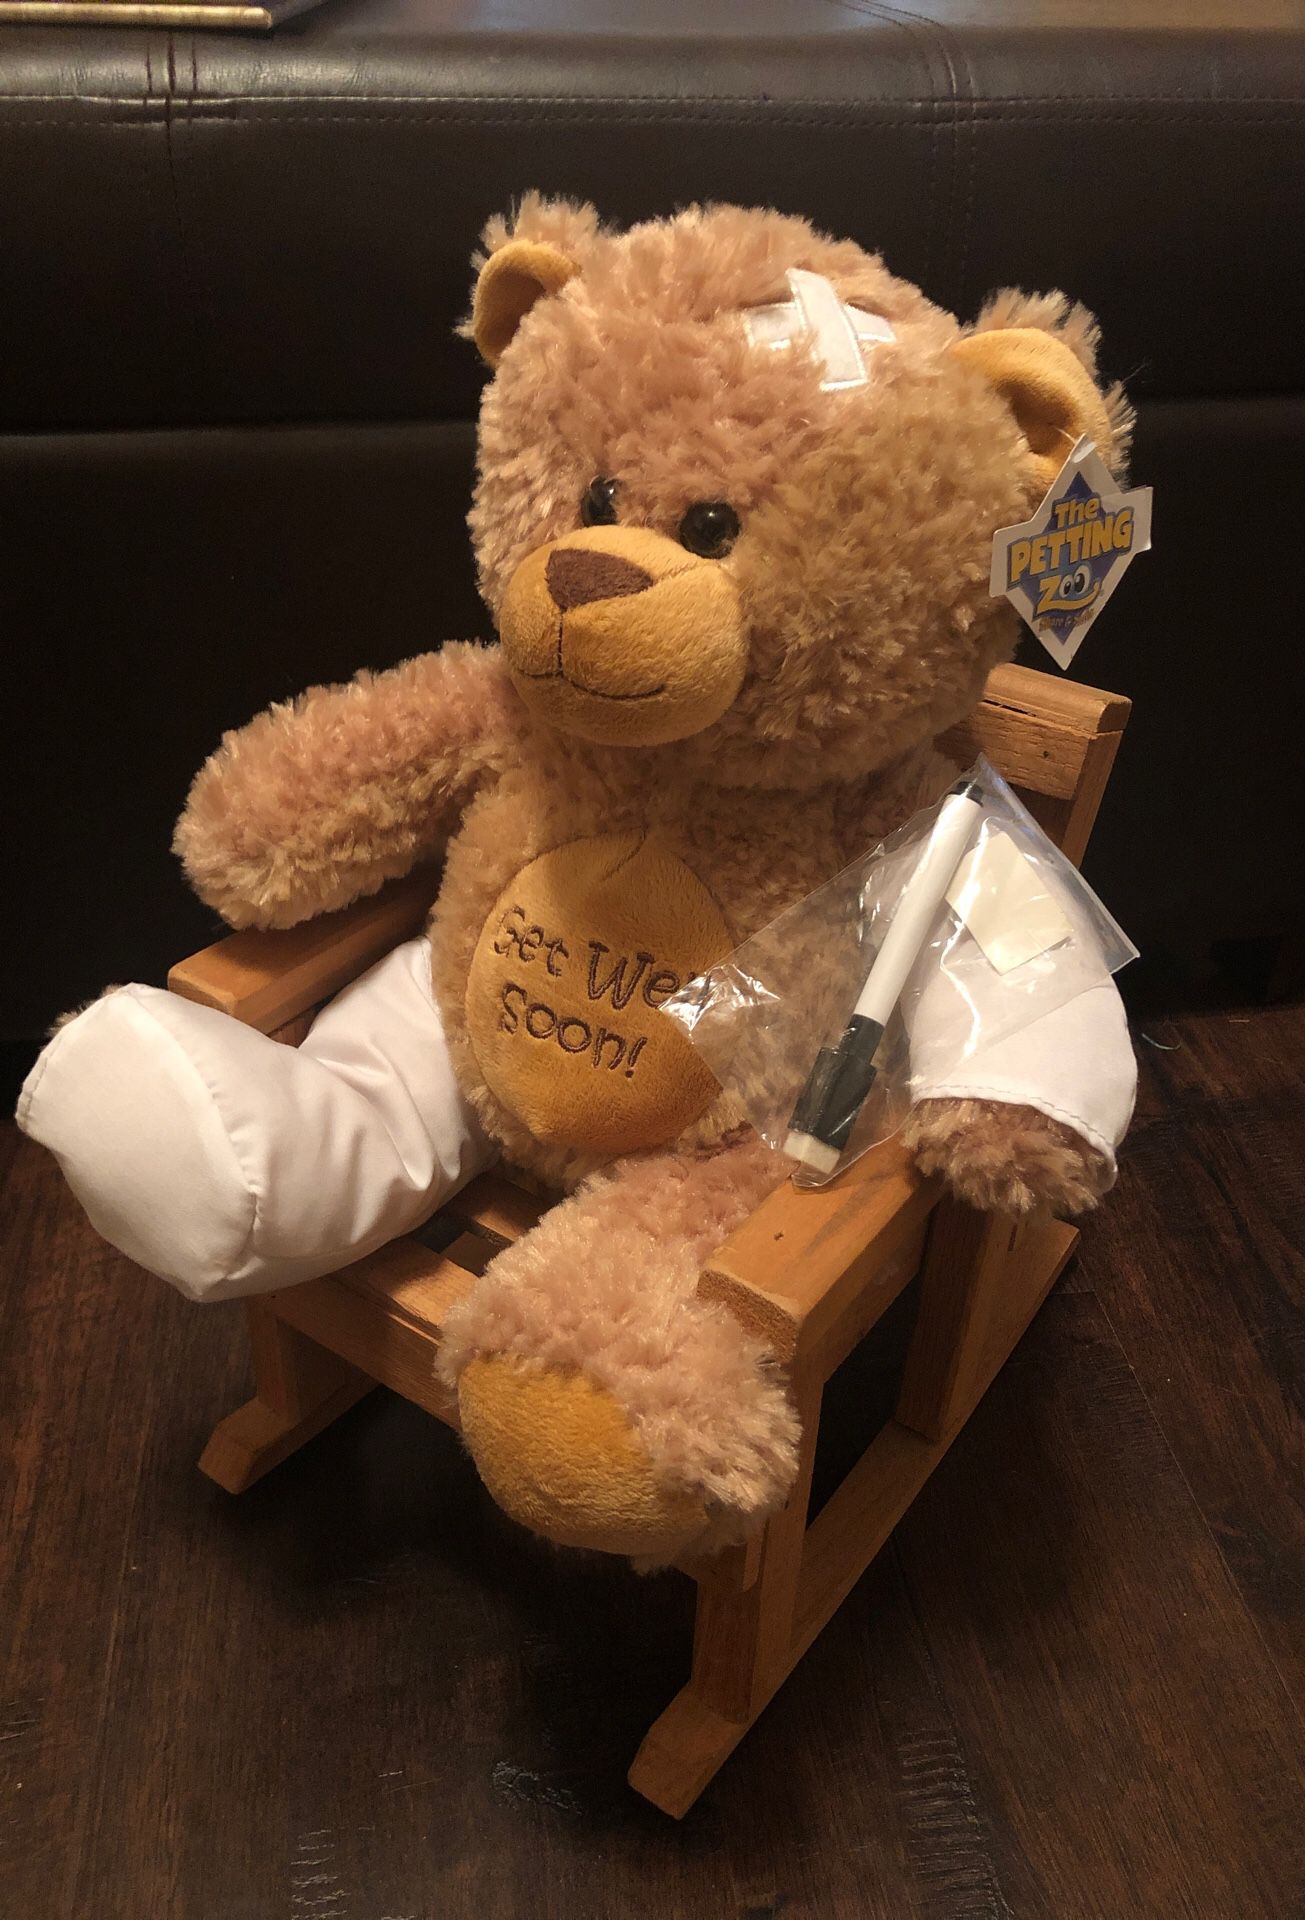 Get well teddy bear and wooden rocking chair